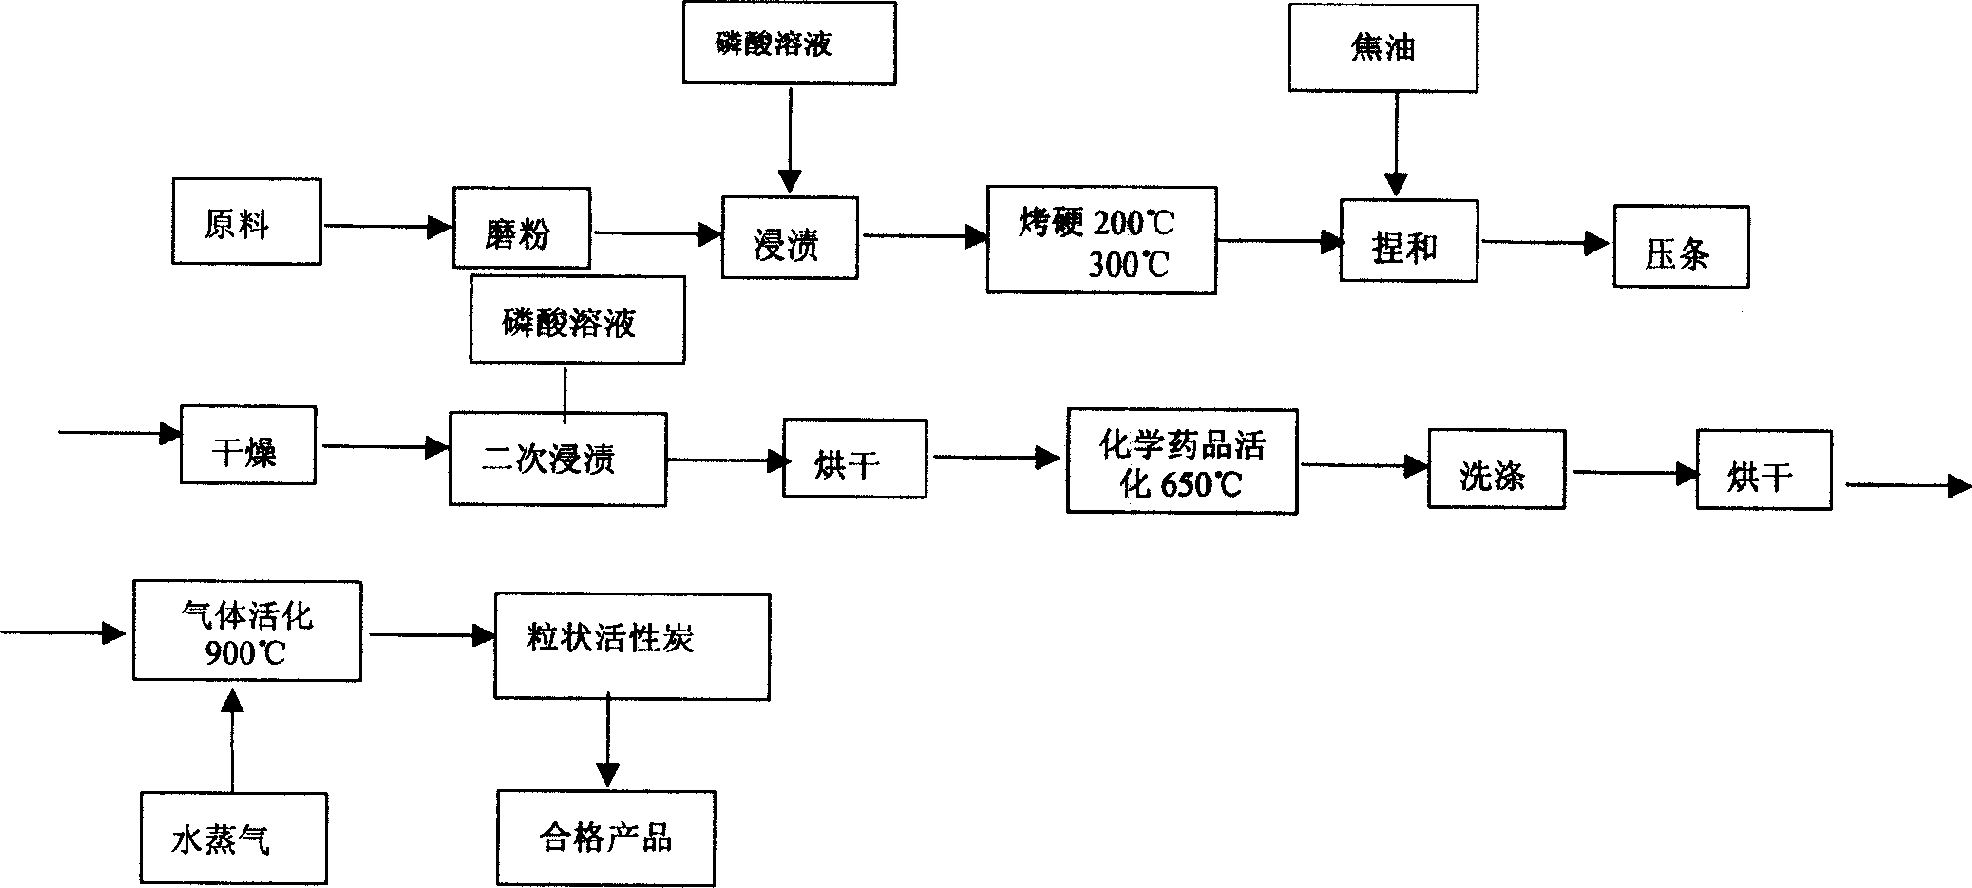 Active carbon producing process with mixed stalk material